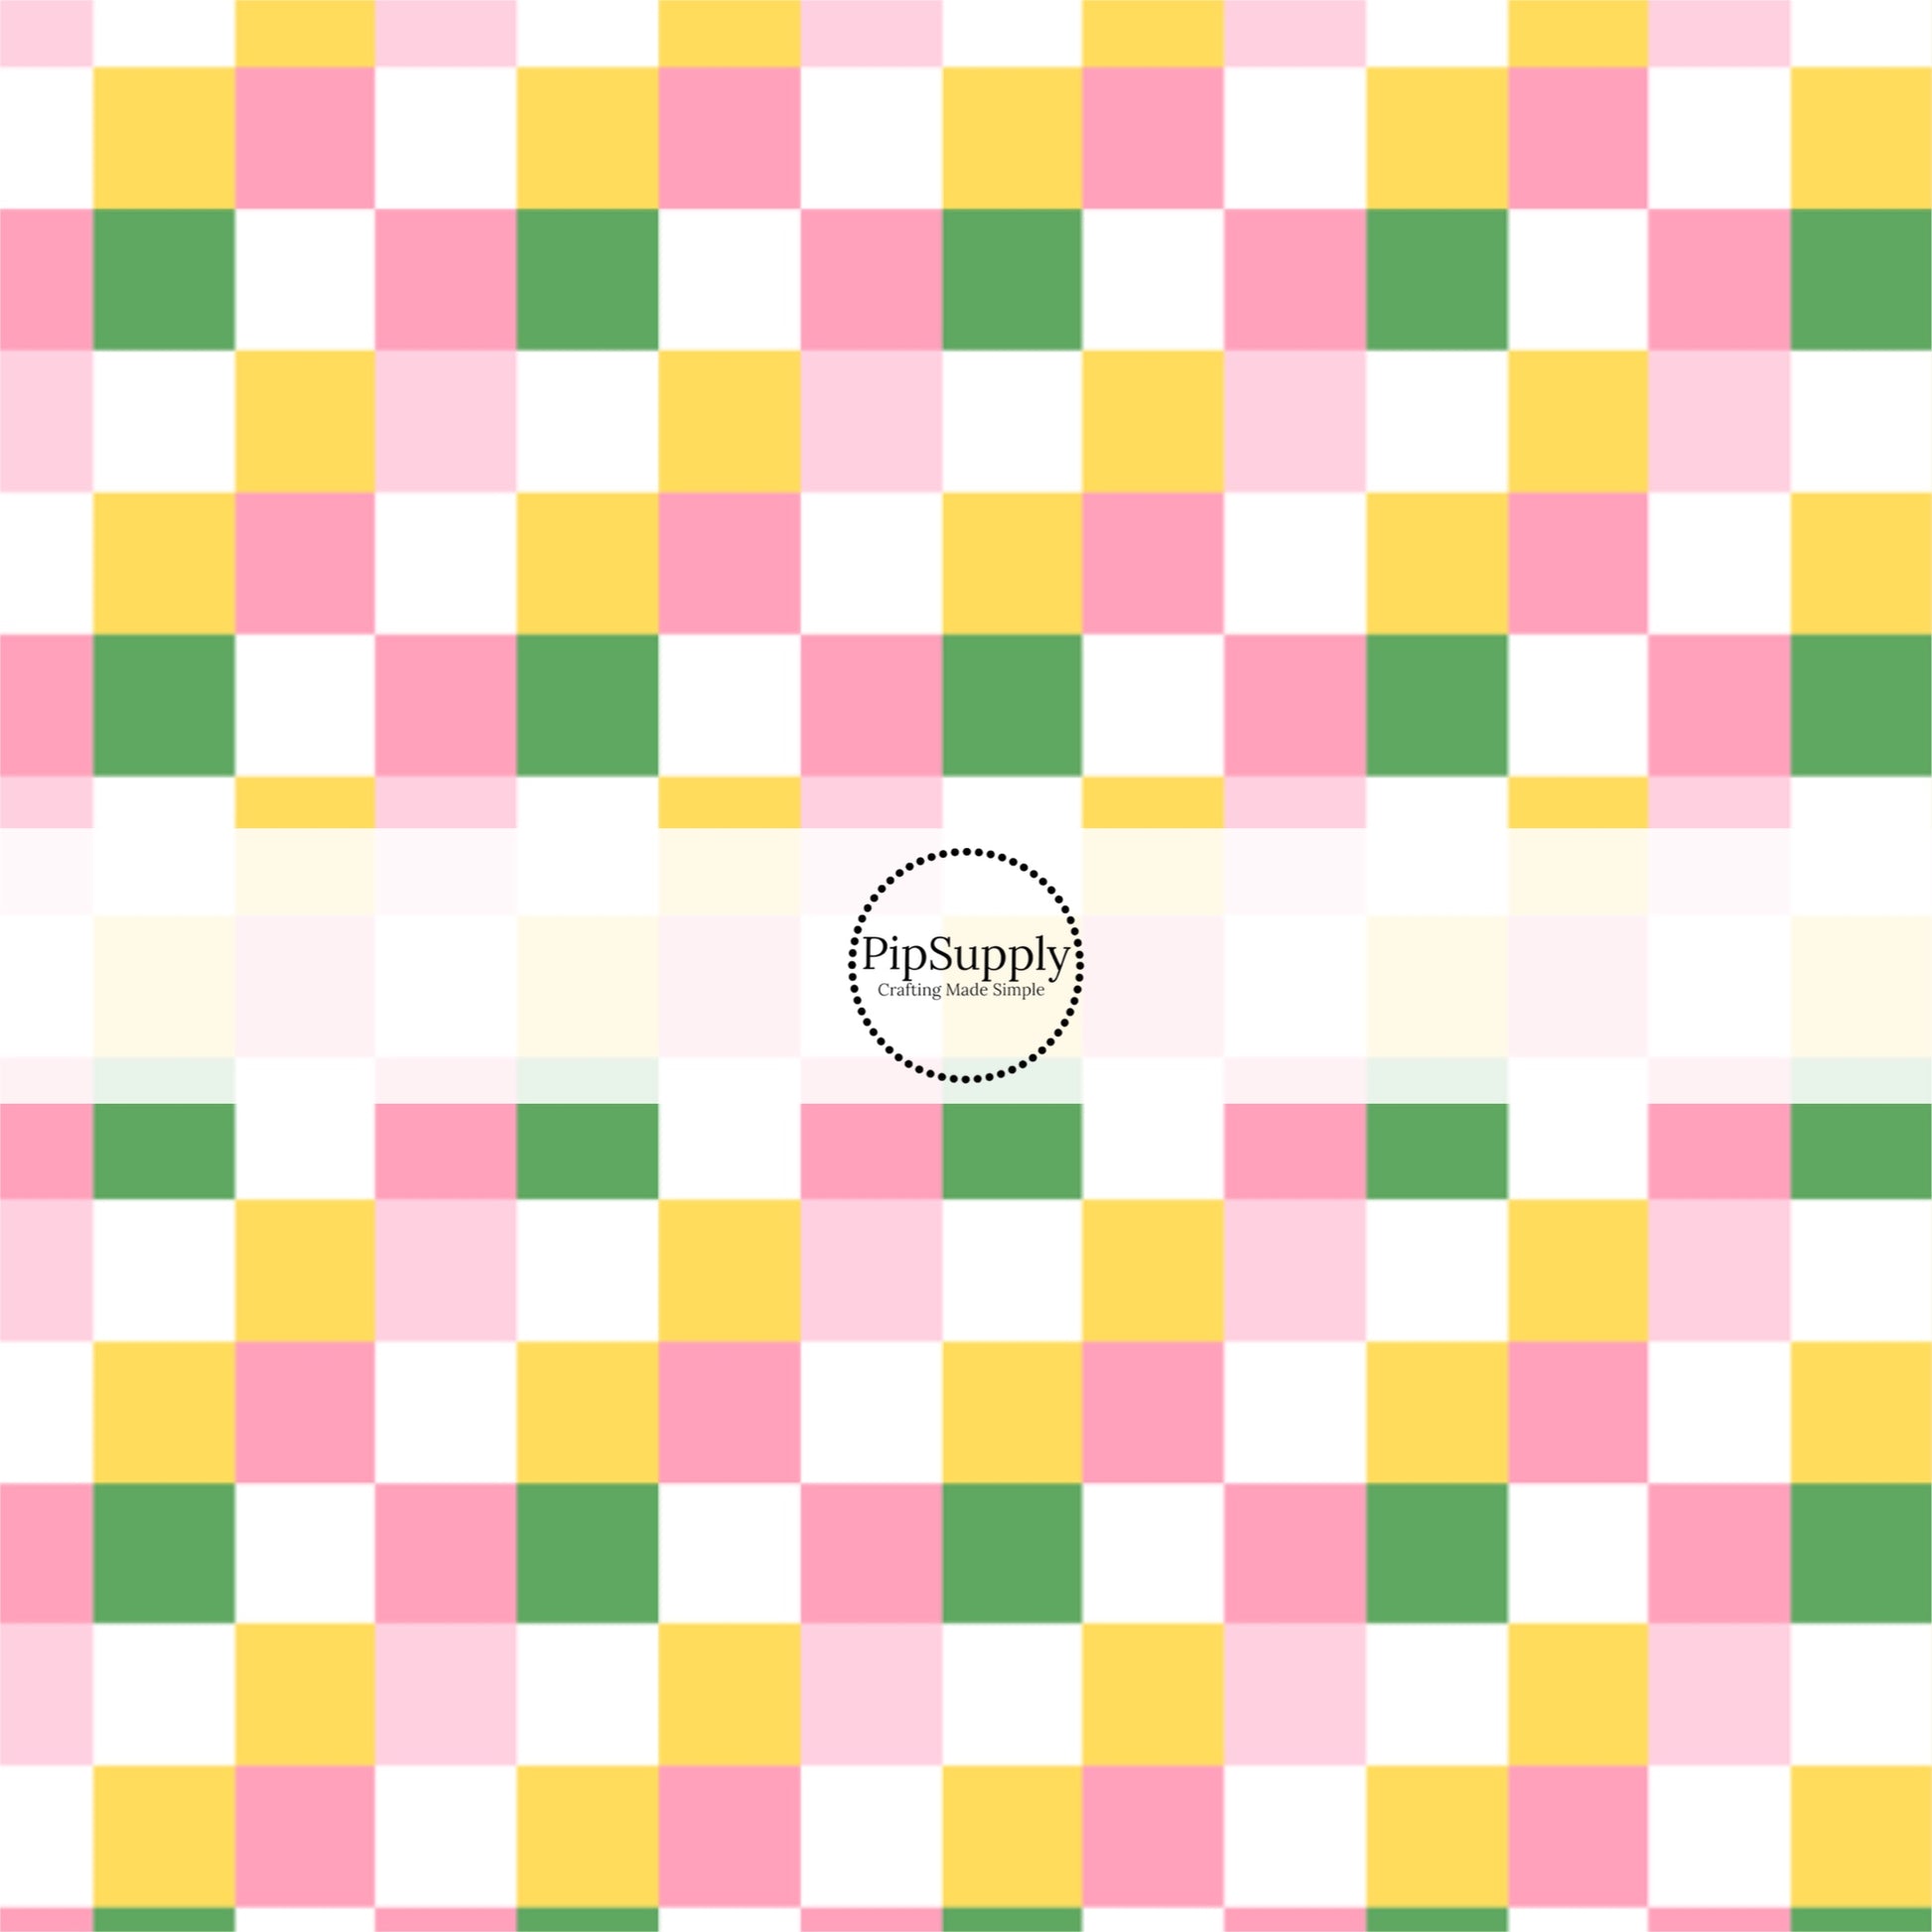 This summer fabric by the yard features pink, yellow, cream, and green plaid pattern. This fun themed fabric can be used for all your sewing and crafting needs!